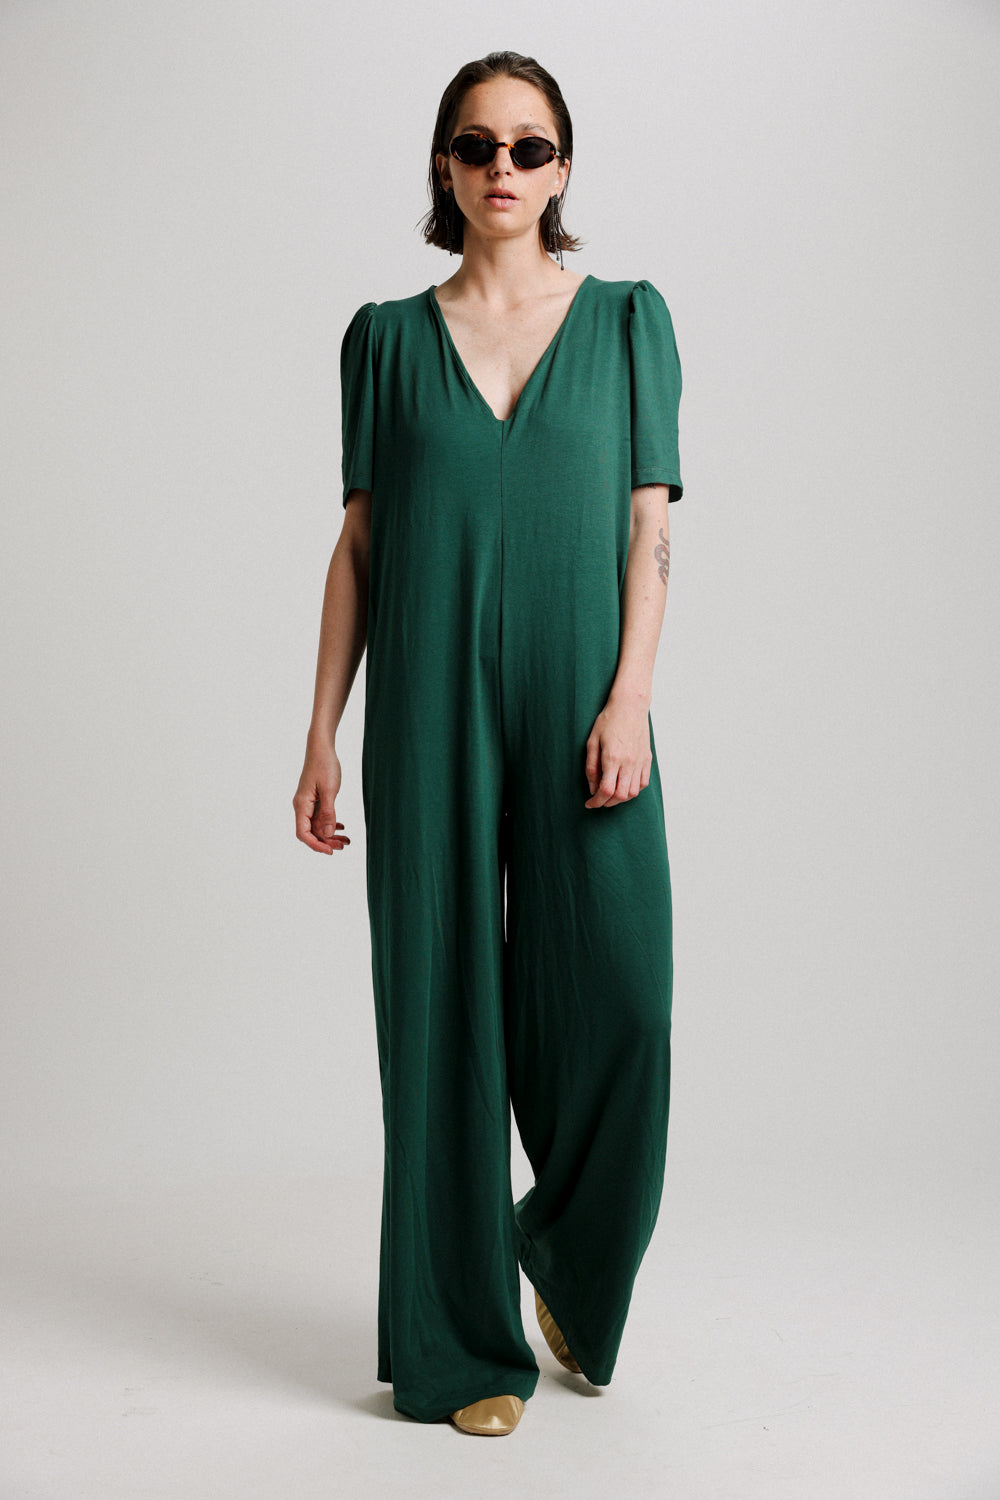 First Green Jumpsuit